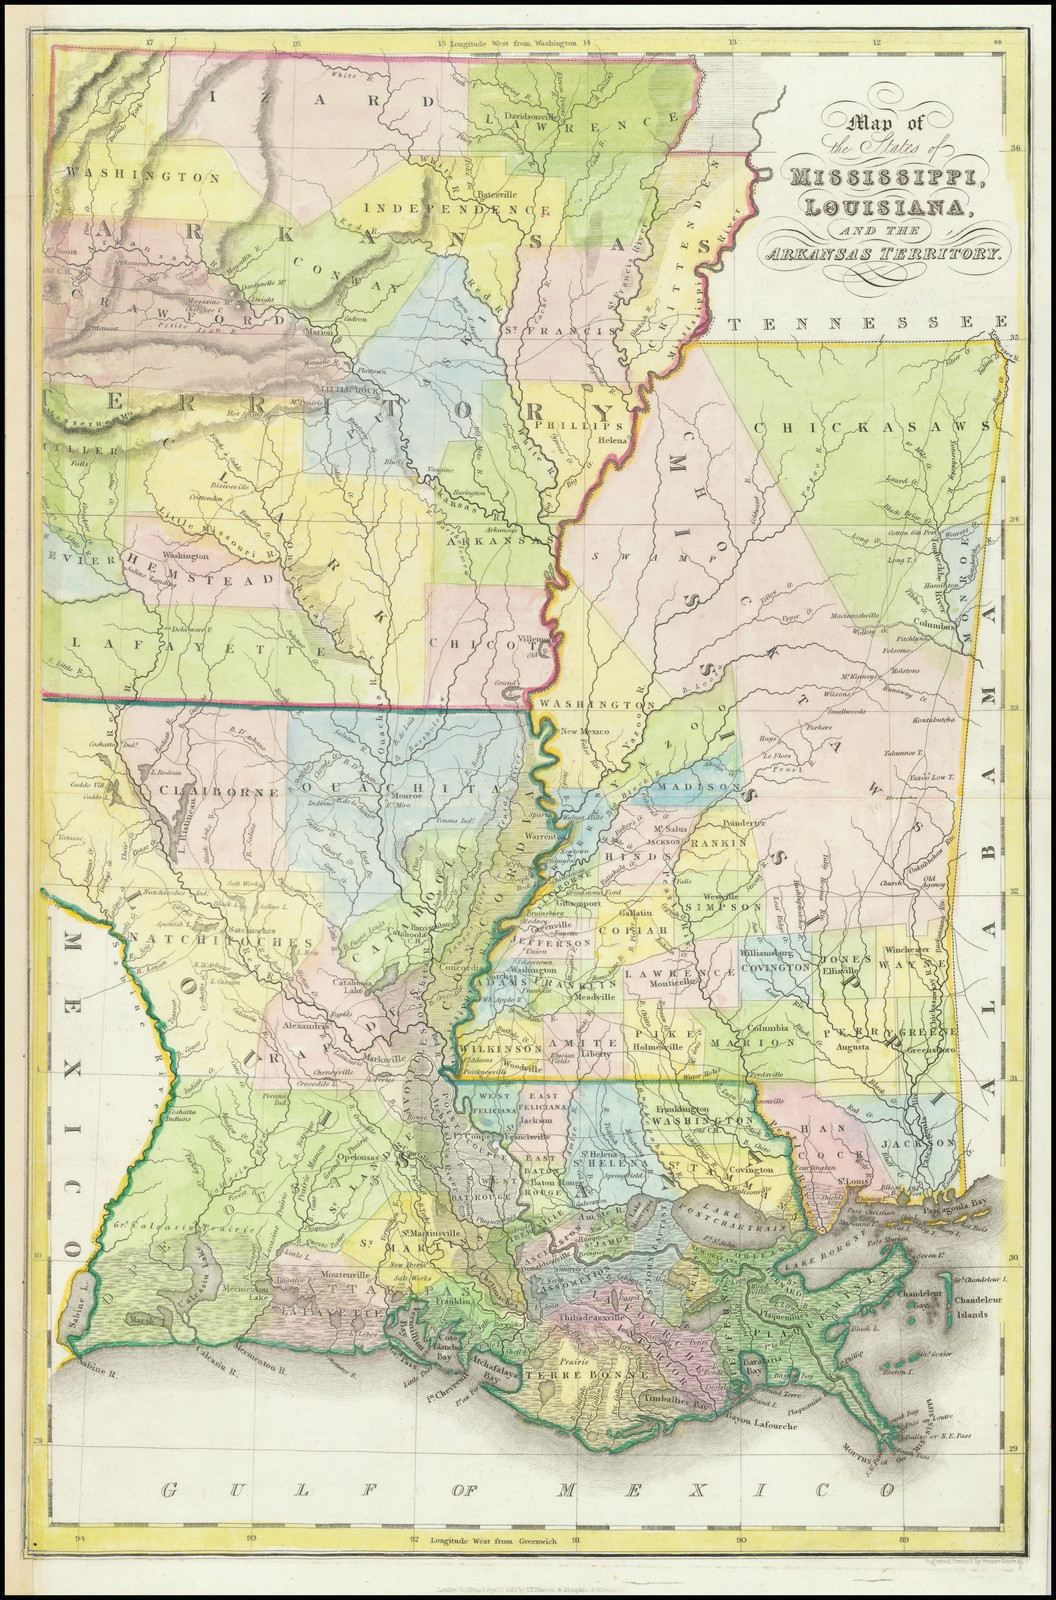 Map of Louisiana, Mississippi and Arkansas - Barry Lawrence Ruderman  Antique Maps Inc.